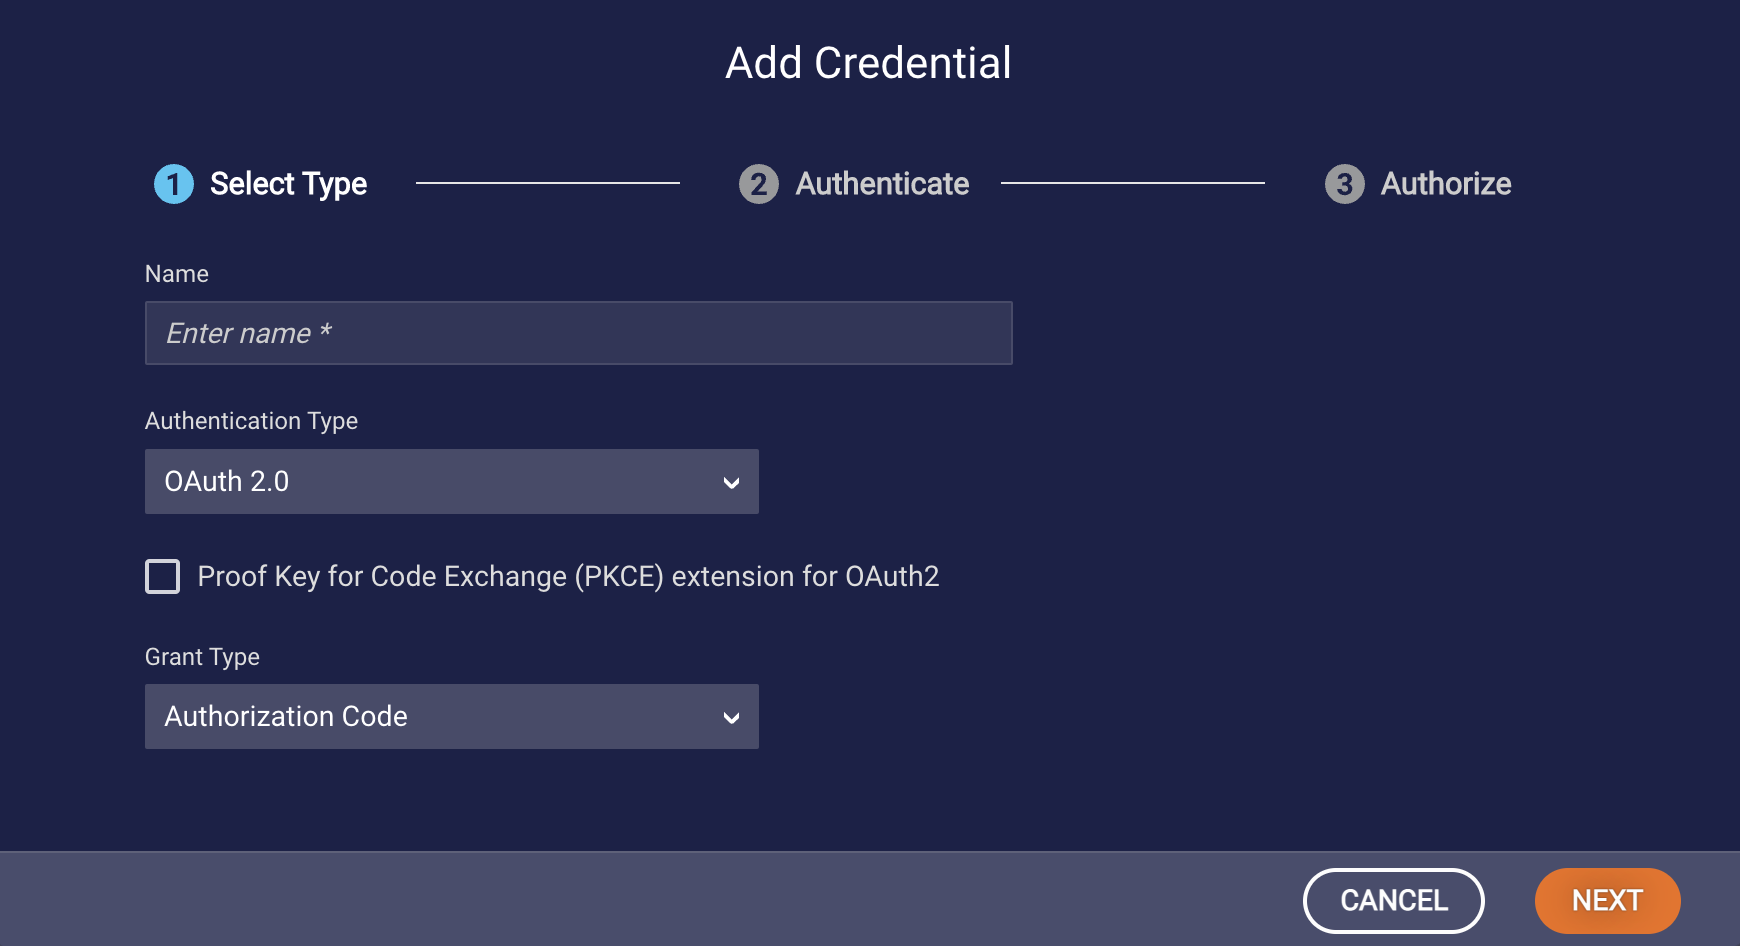 Add Credentials page when adding an OAuth 2.0 credential and selecting the credential type